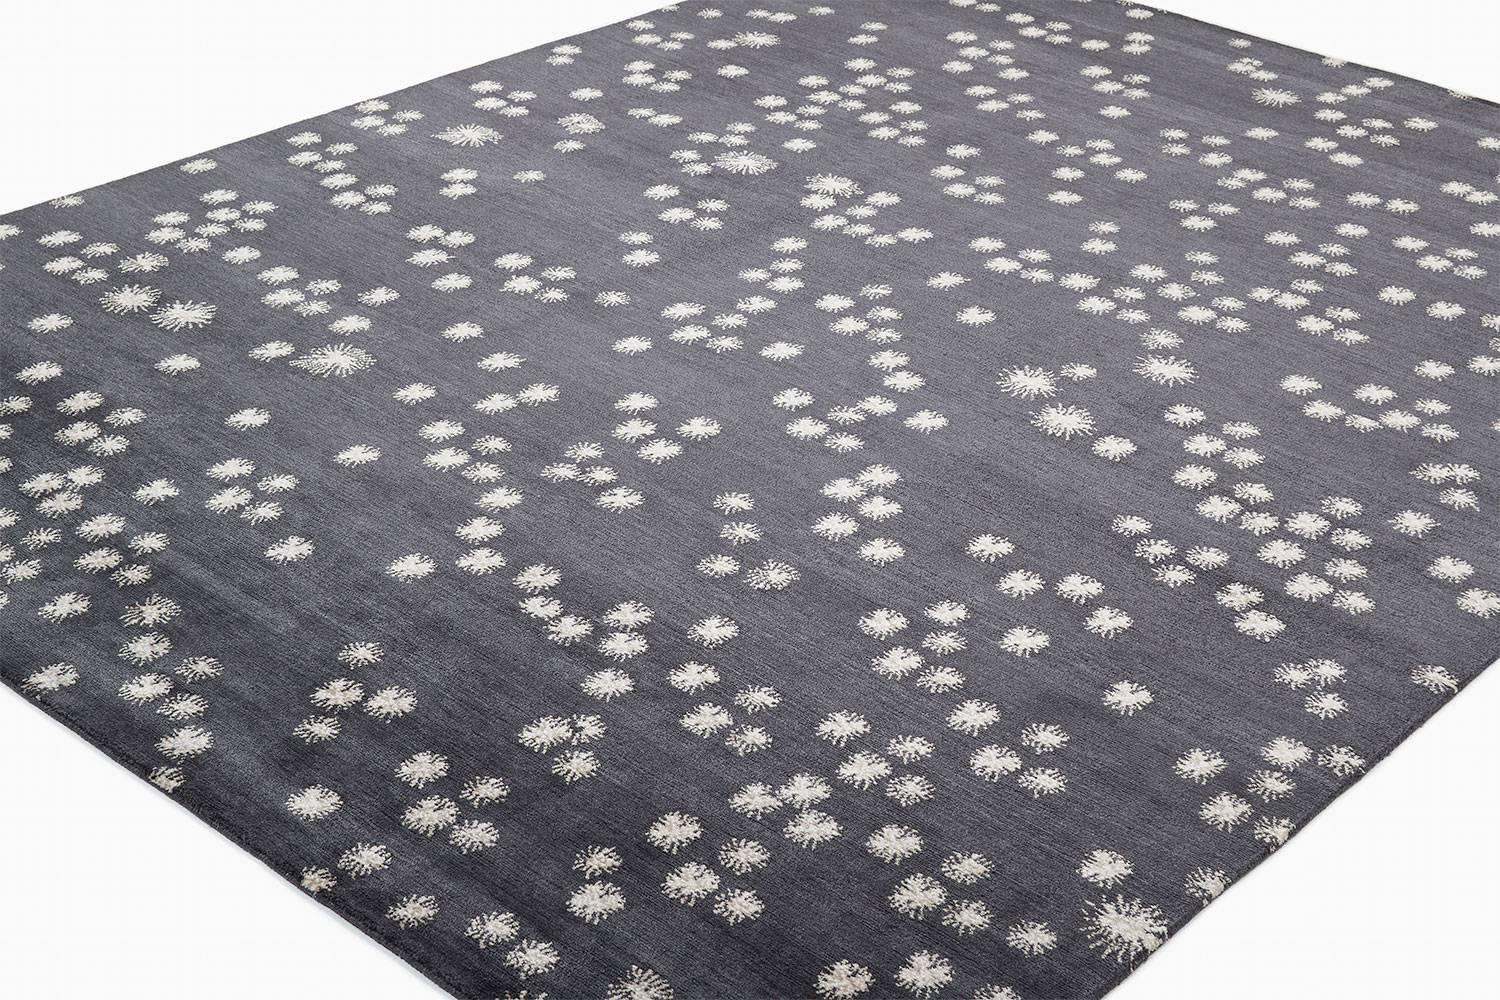 Nepalese Midnight Blue Silk And Wool Modern Asterisk Rug By CARINI 8x10 